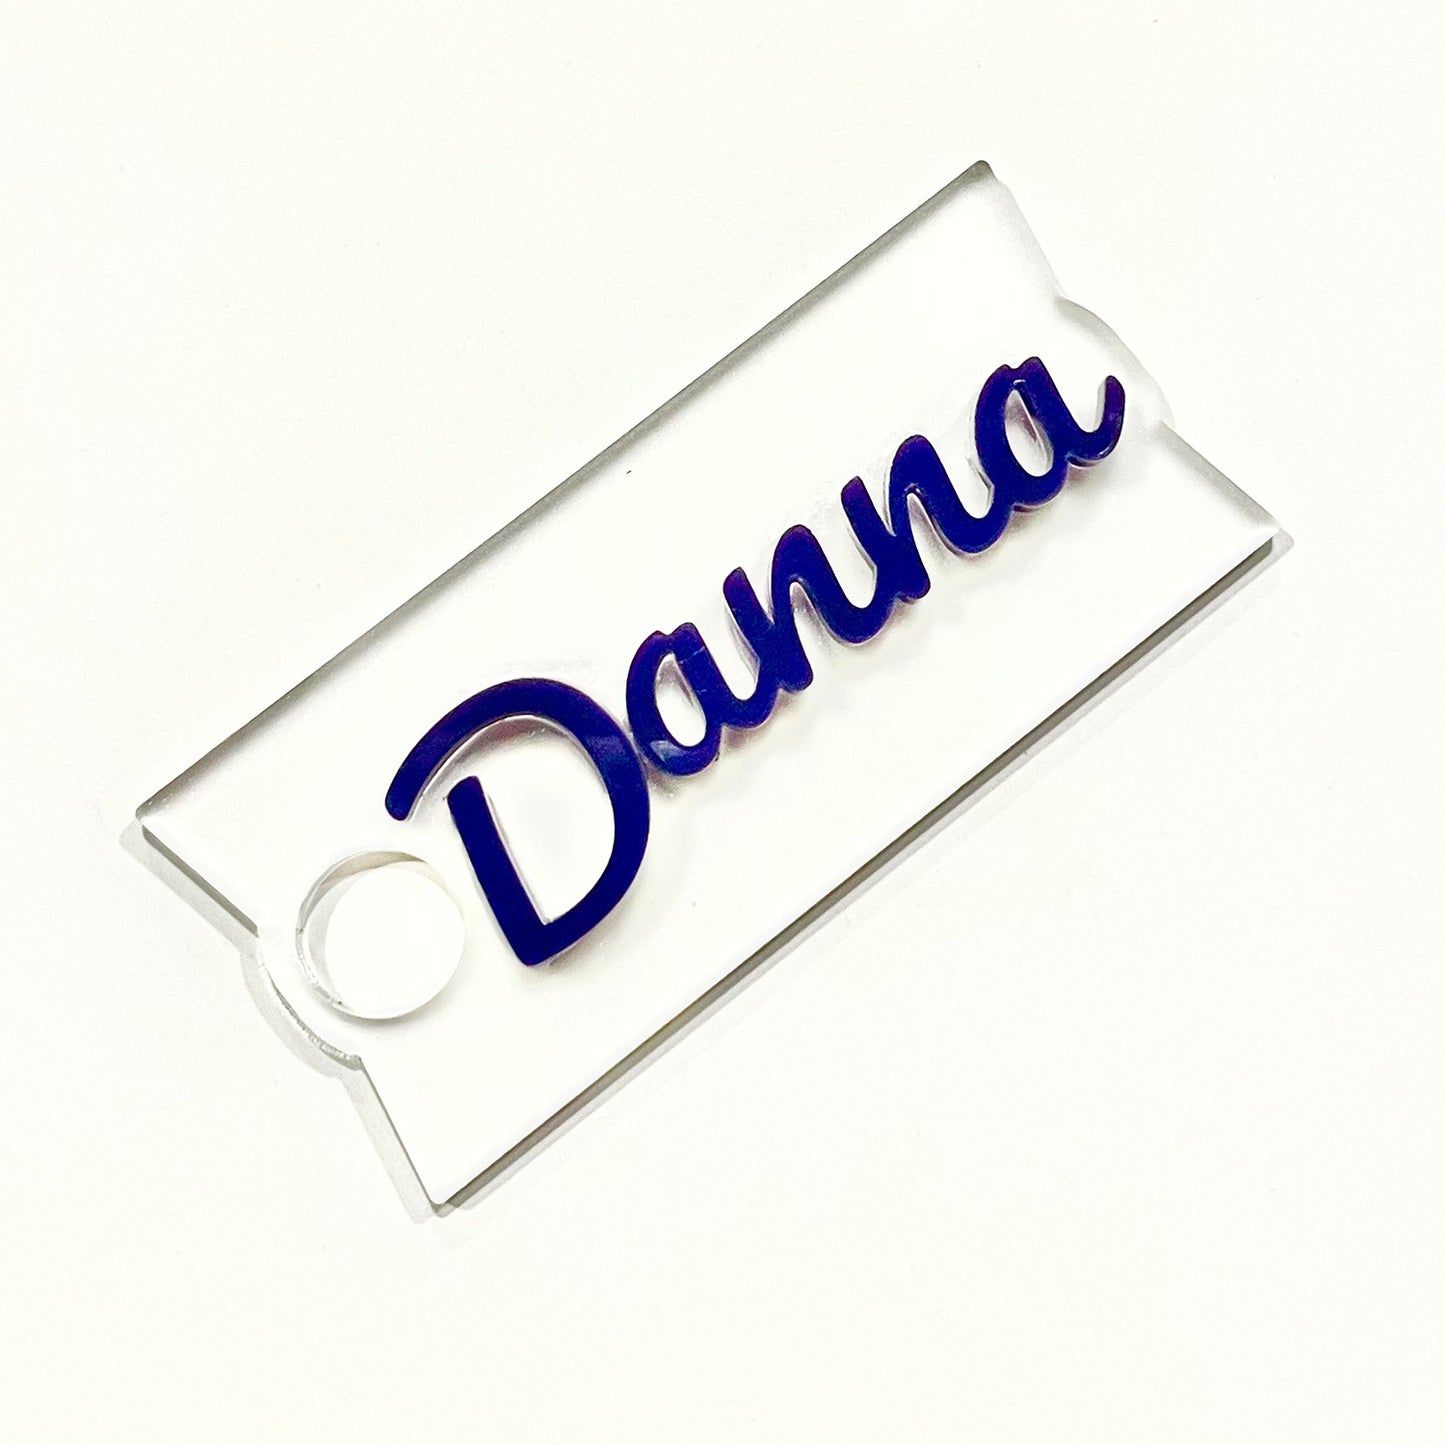 Our custom Stanley name plates are a quick and easy way to